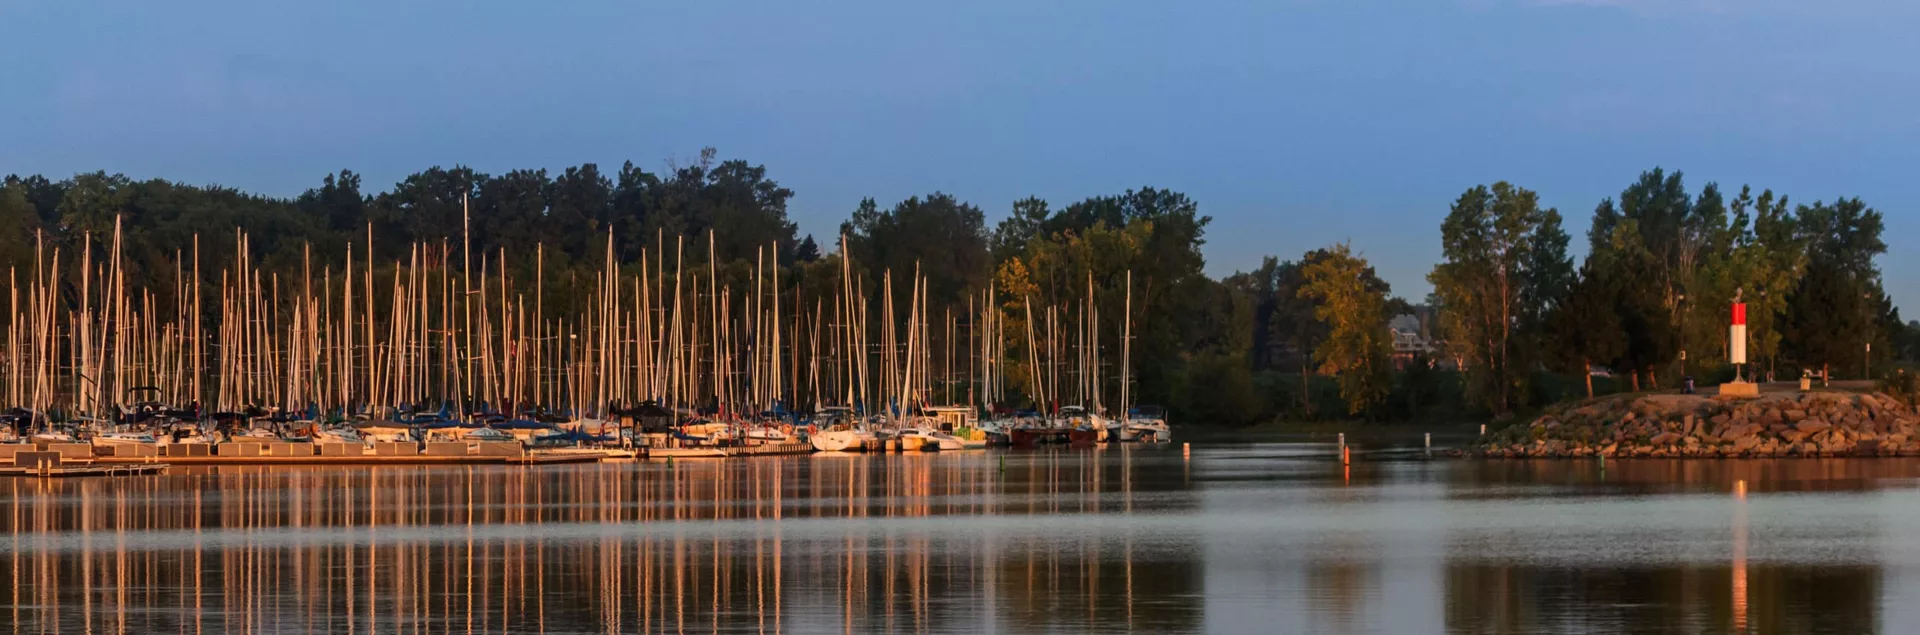 A group of sailboats moored in Nepean.